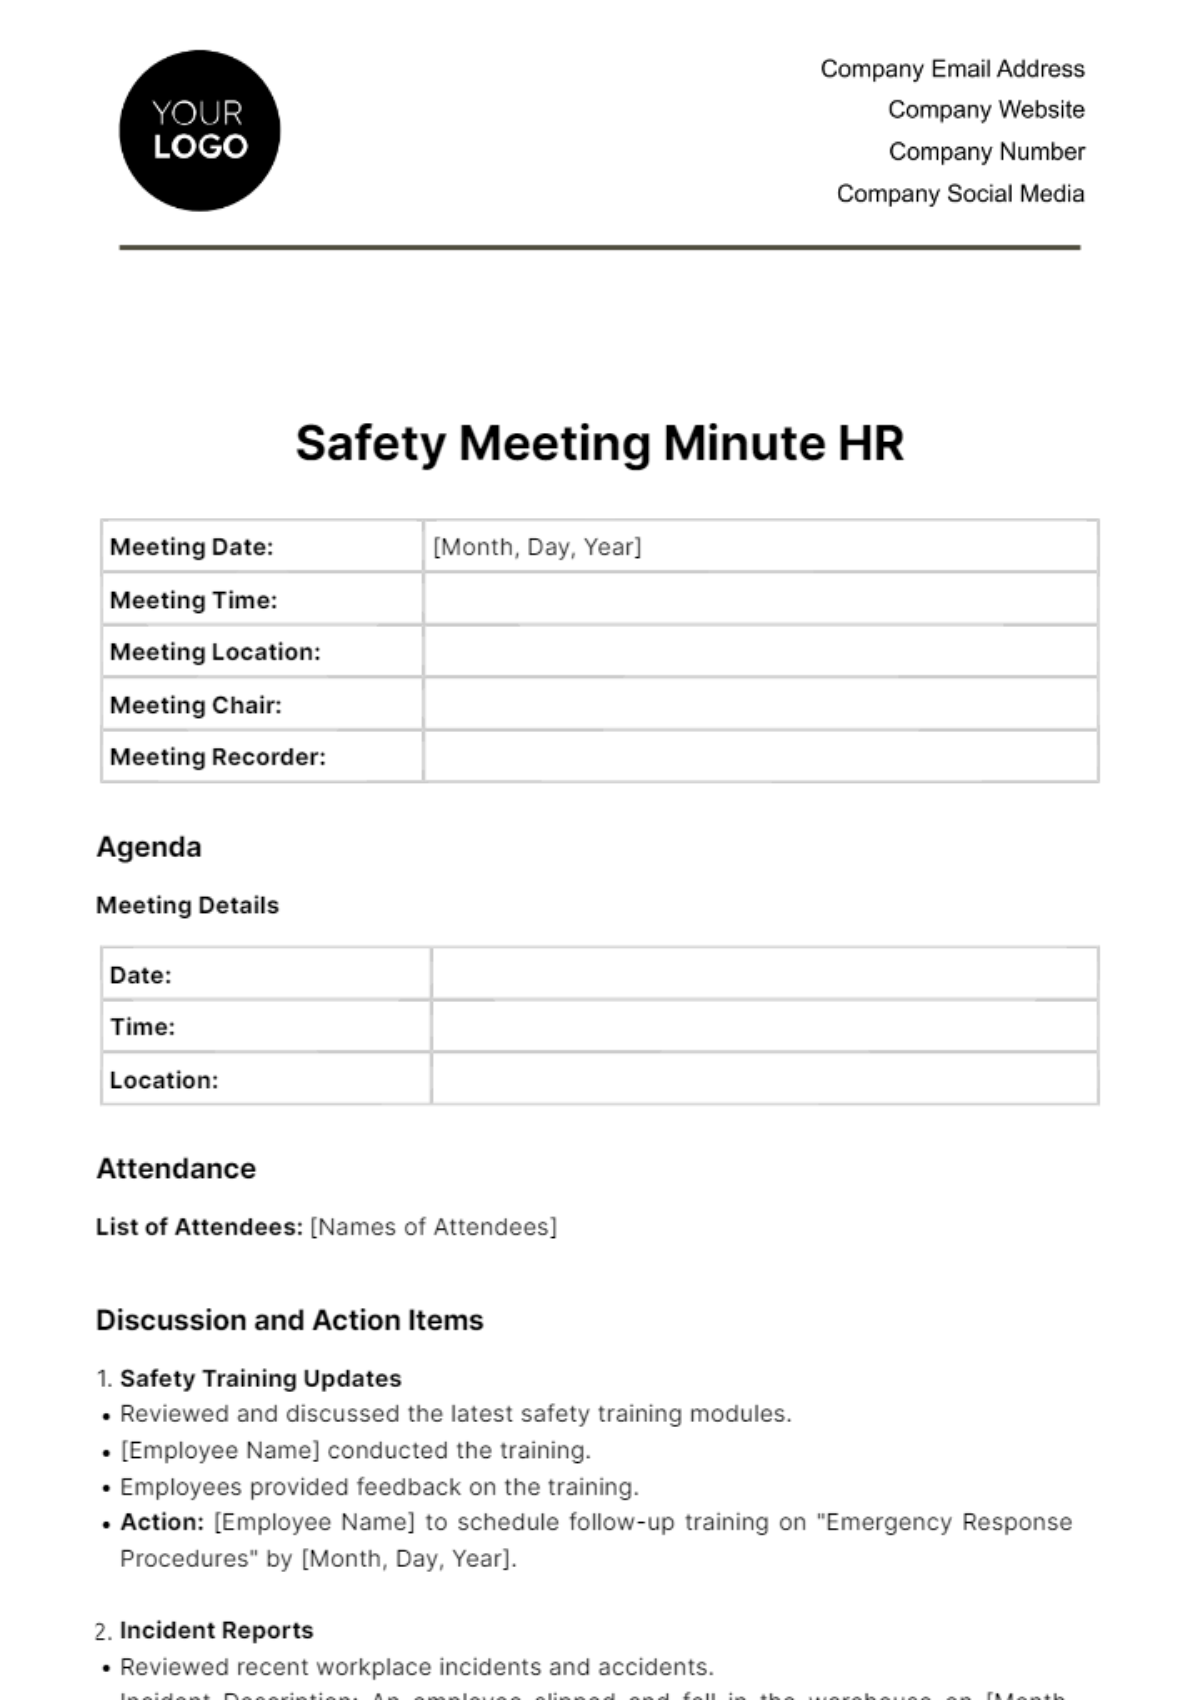 Free Safety Meeting Minute HR Template